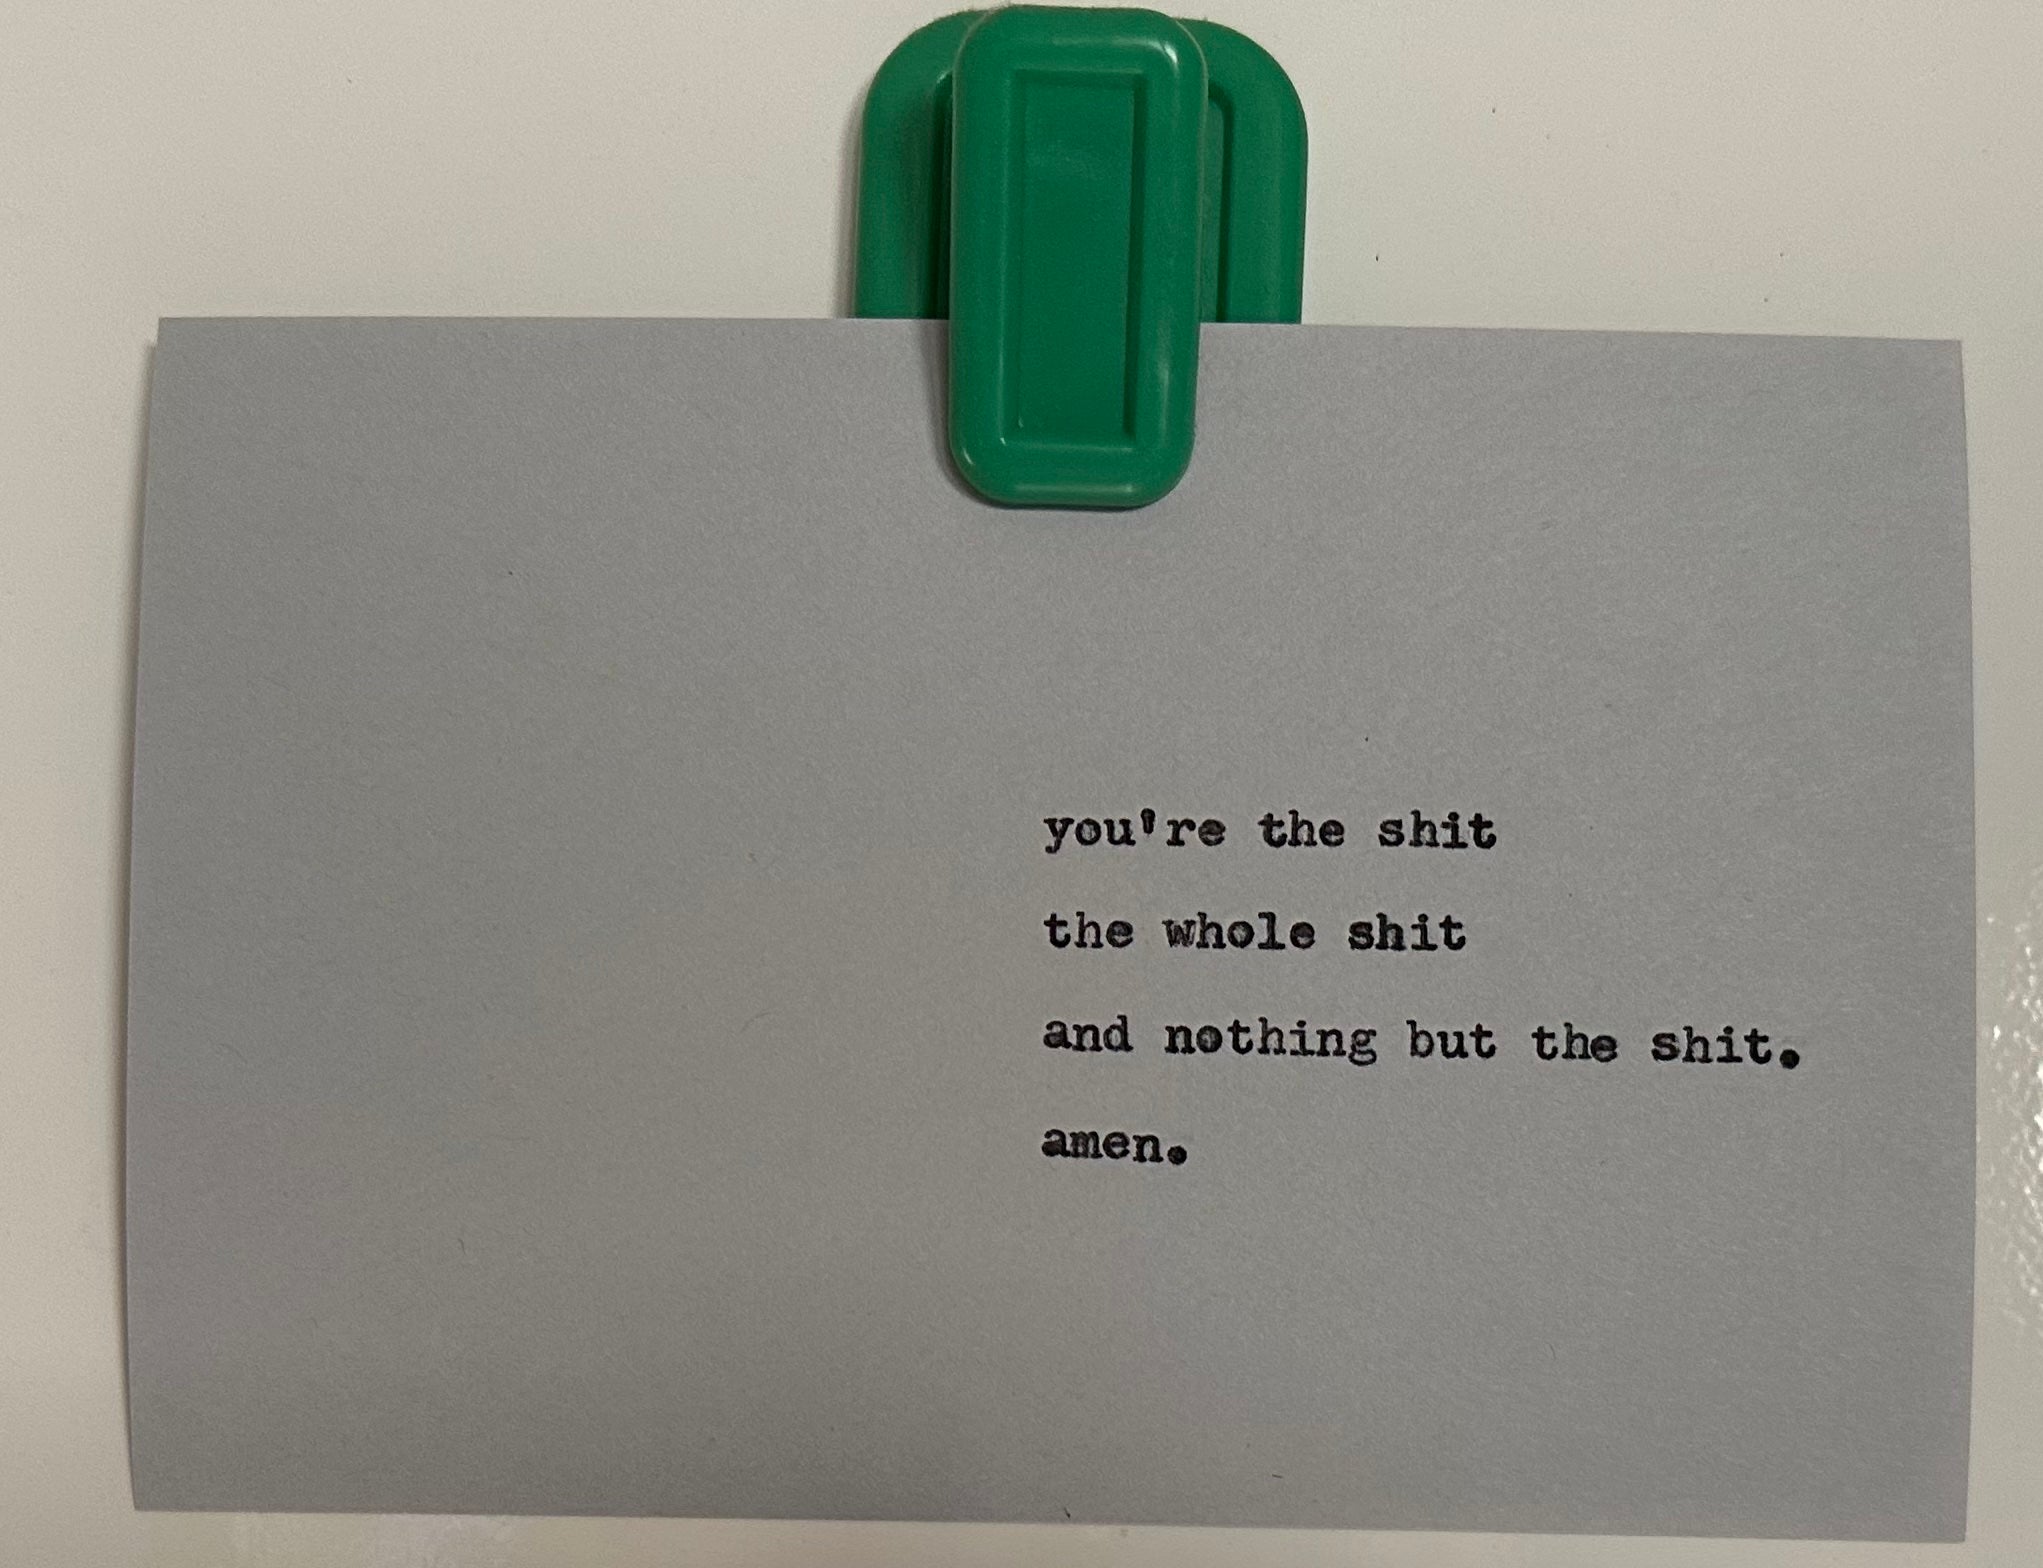 You are the whole shit card